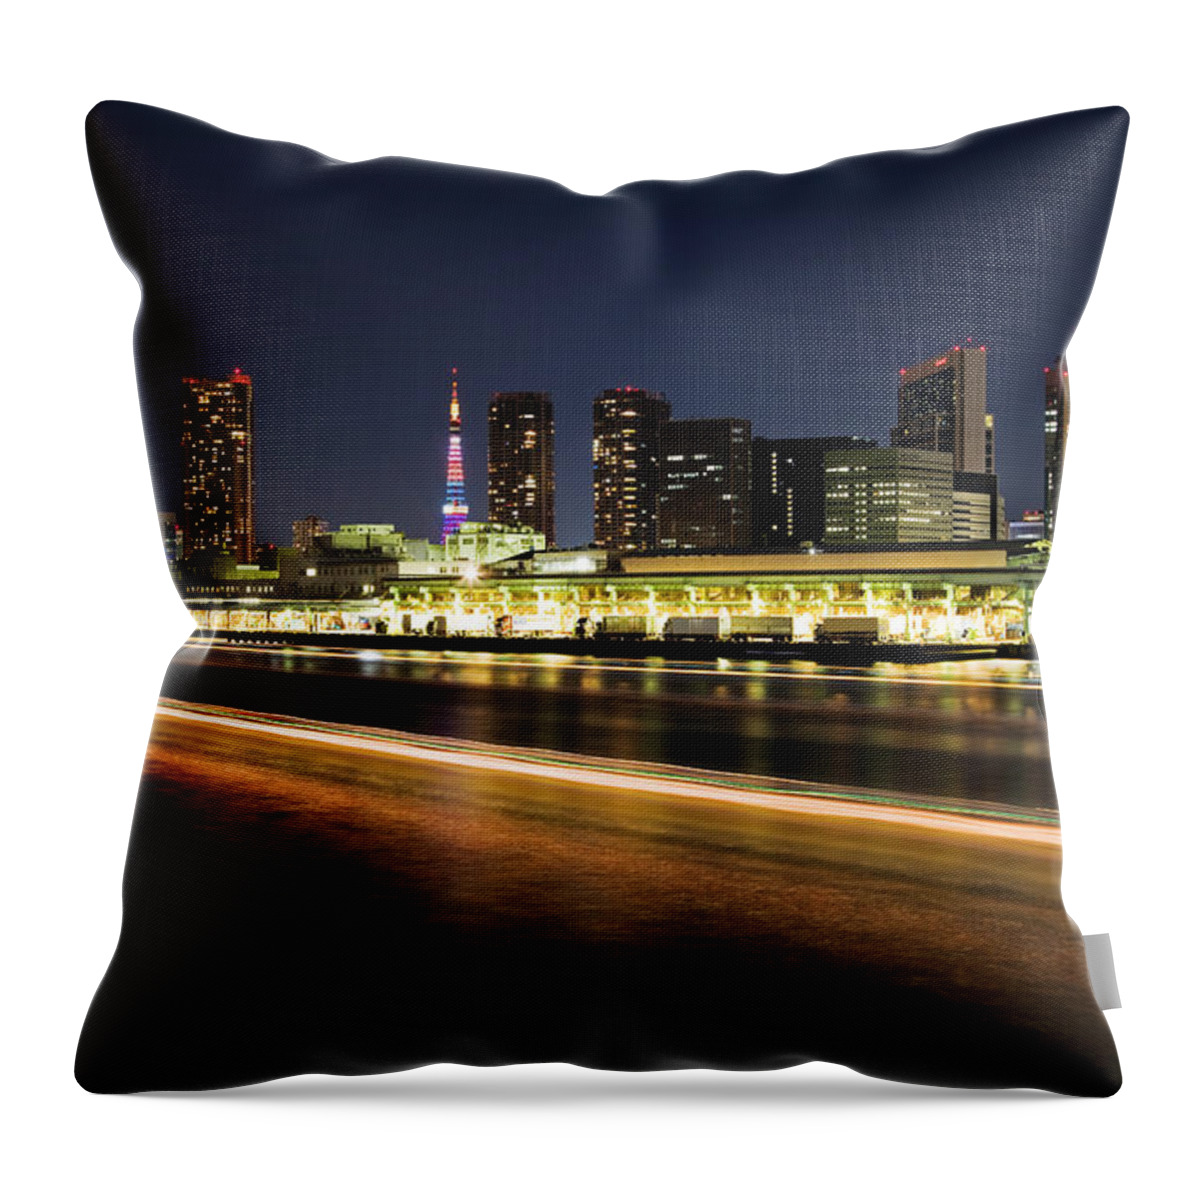 Tokyo Tower Throw Pillow featuring the photograph Tokyo Nightview Of Buildings And Tokyo by Photography By Zhangxun